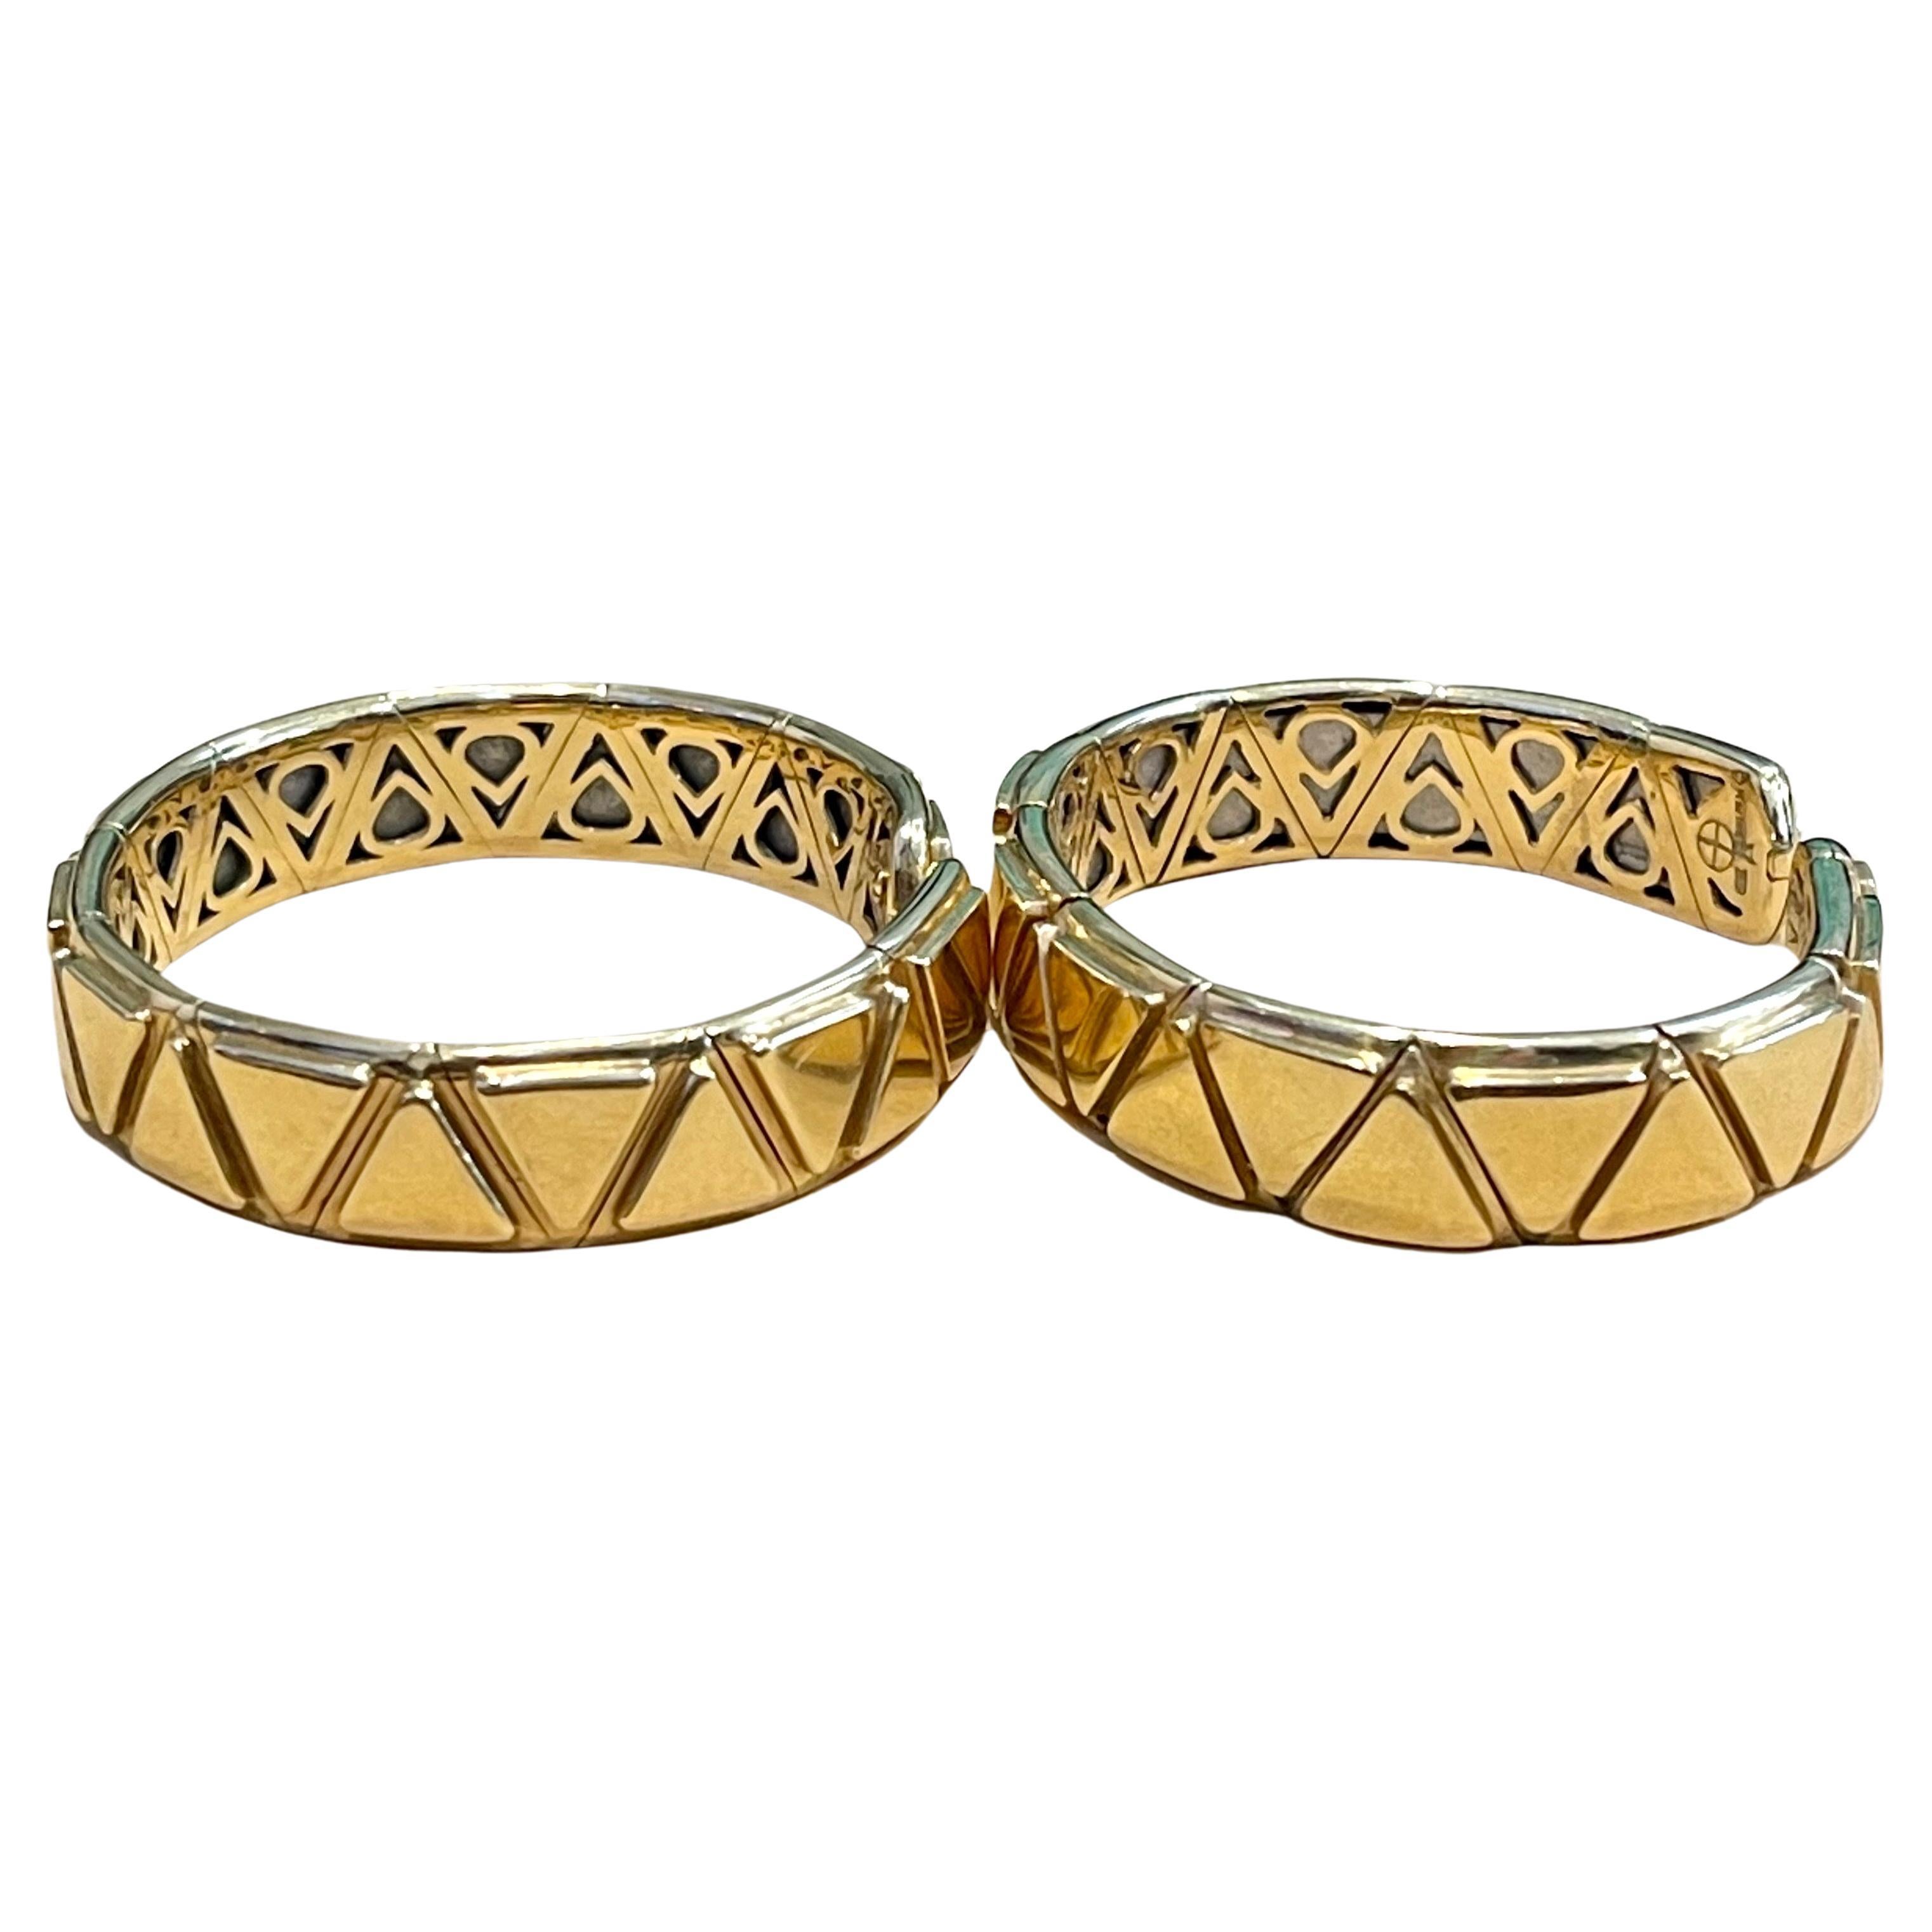 18k Marina B cuff 90 Gm Triangoli Collection
small size , will fit only small wrist
Marina Bulgari
Marina Bulgari is widely regarded as one of the most important women in jewelry of our time. Her adventurous and ambitious spirit led her to leave her